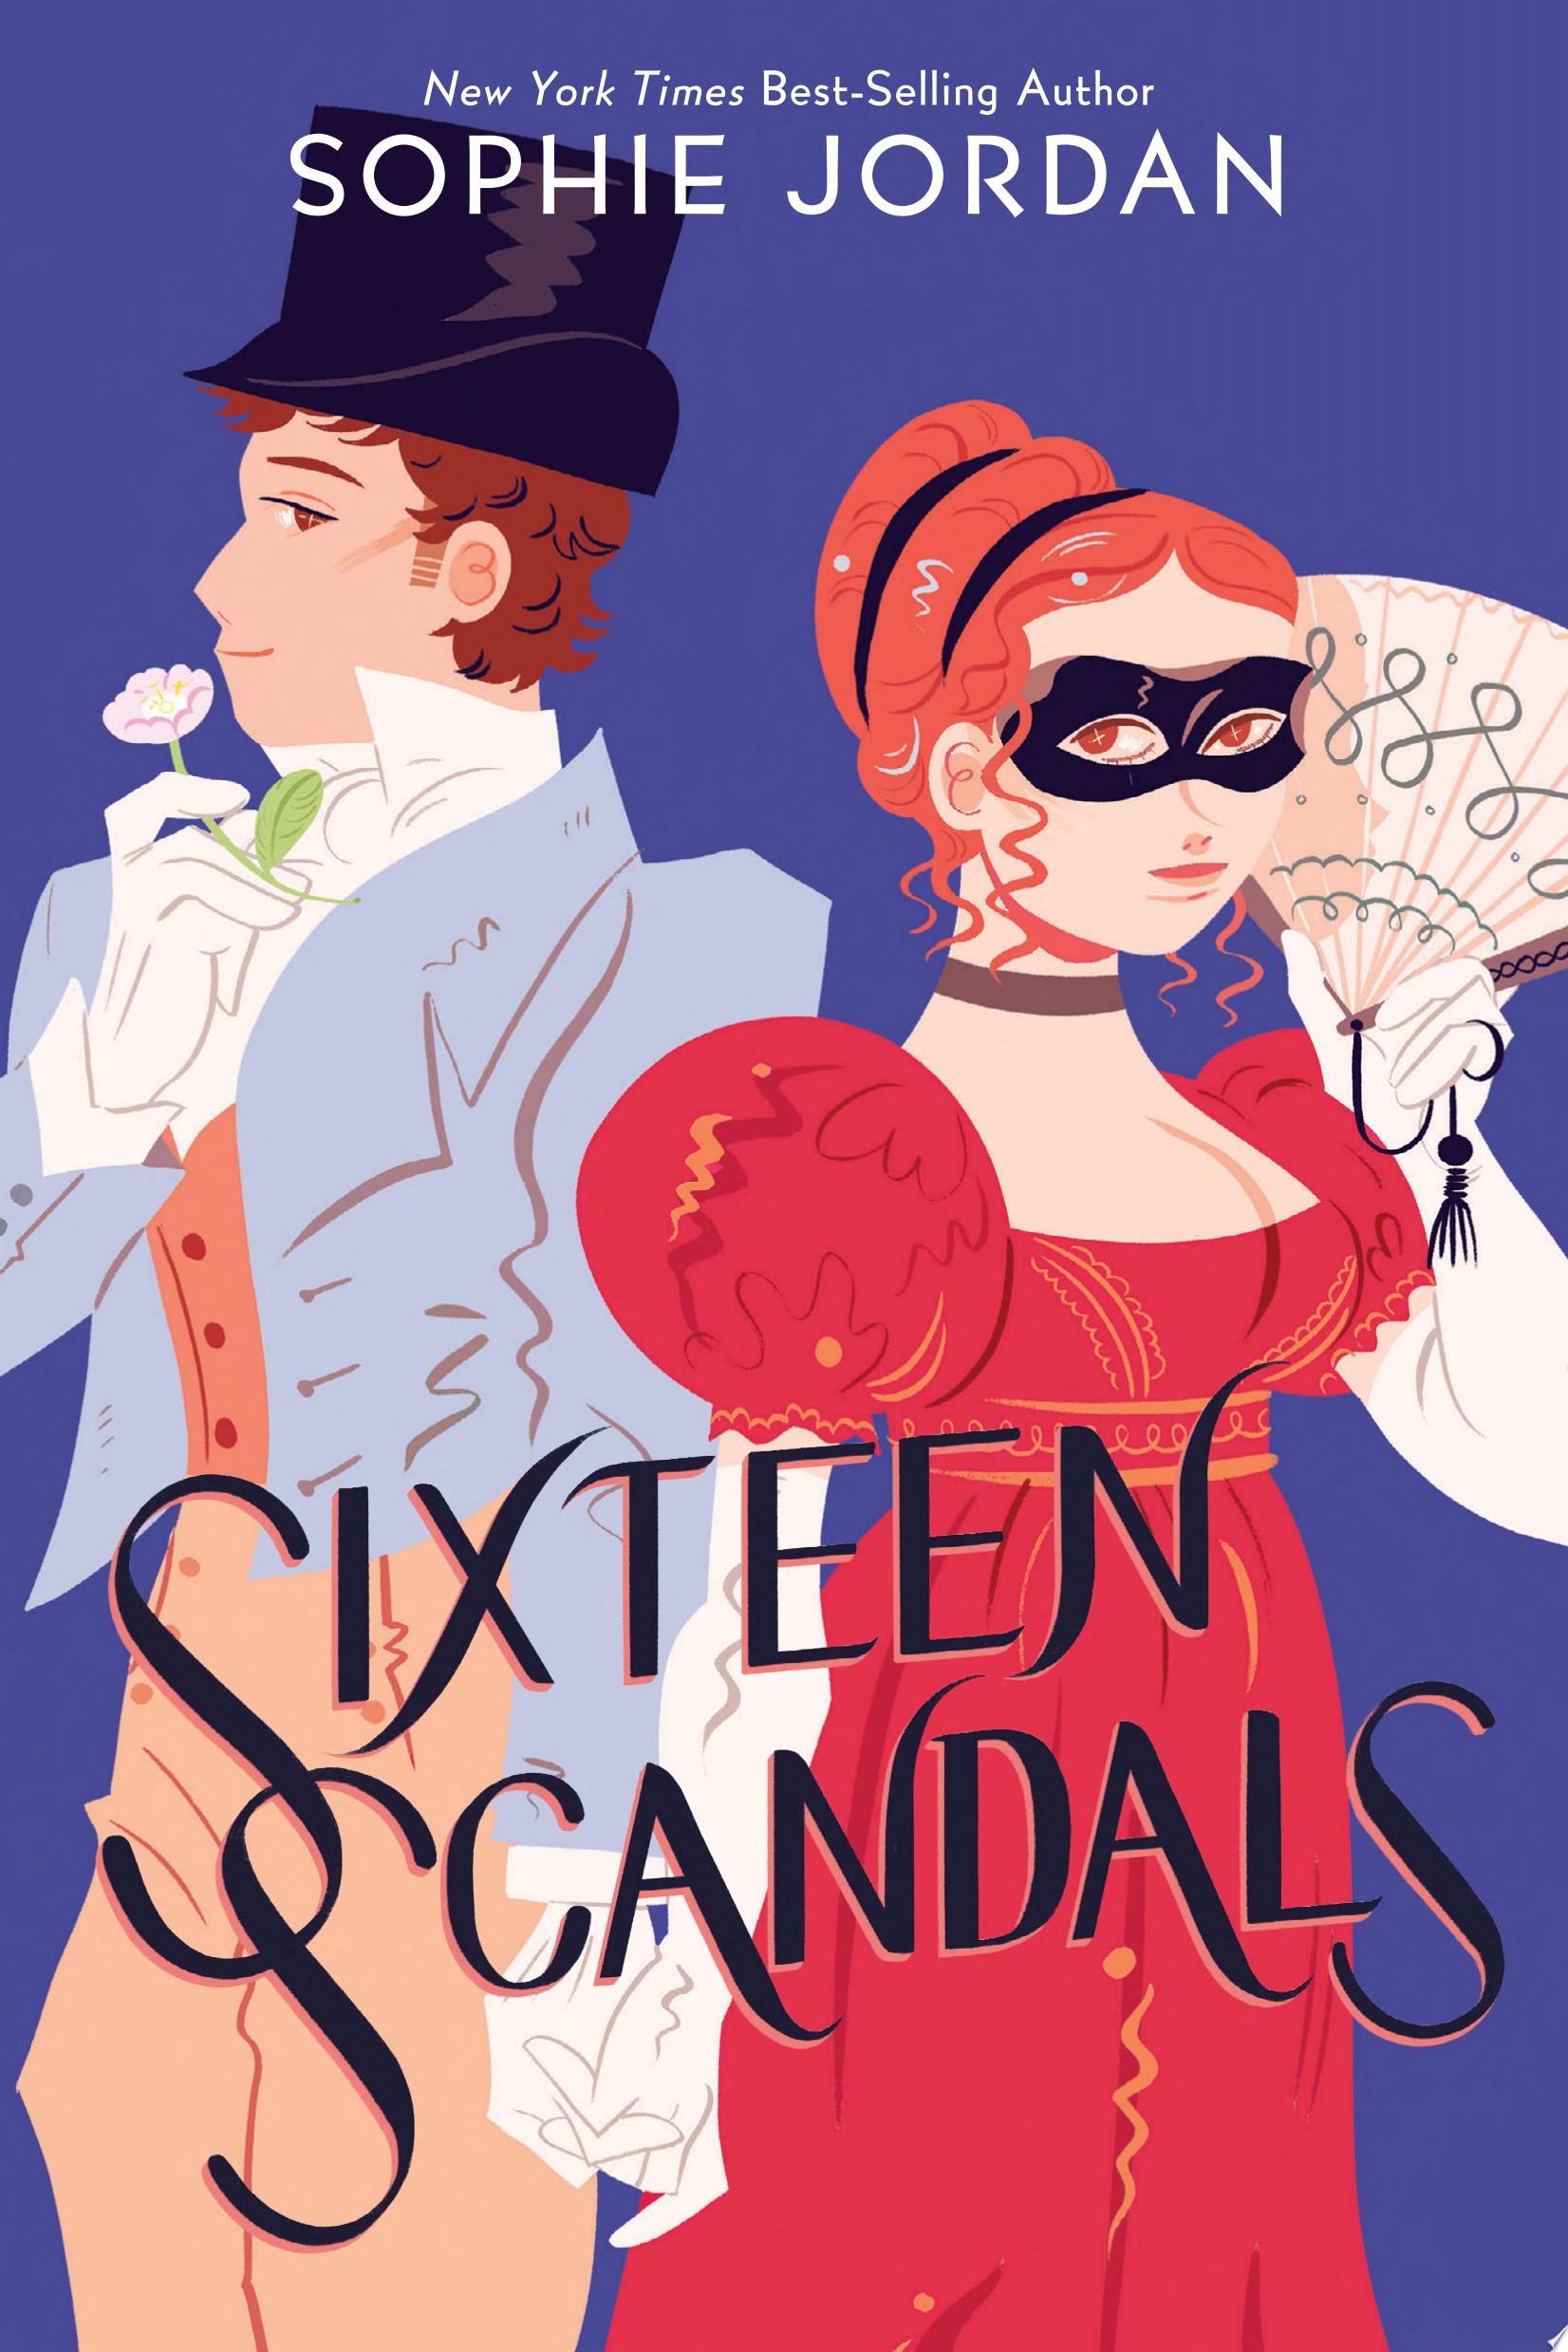 Image for "Sixteen Scandals"